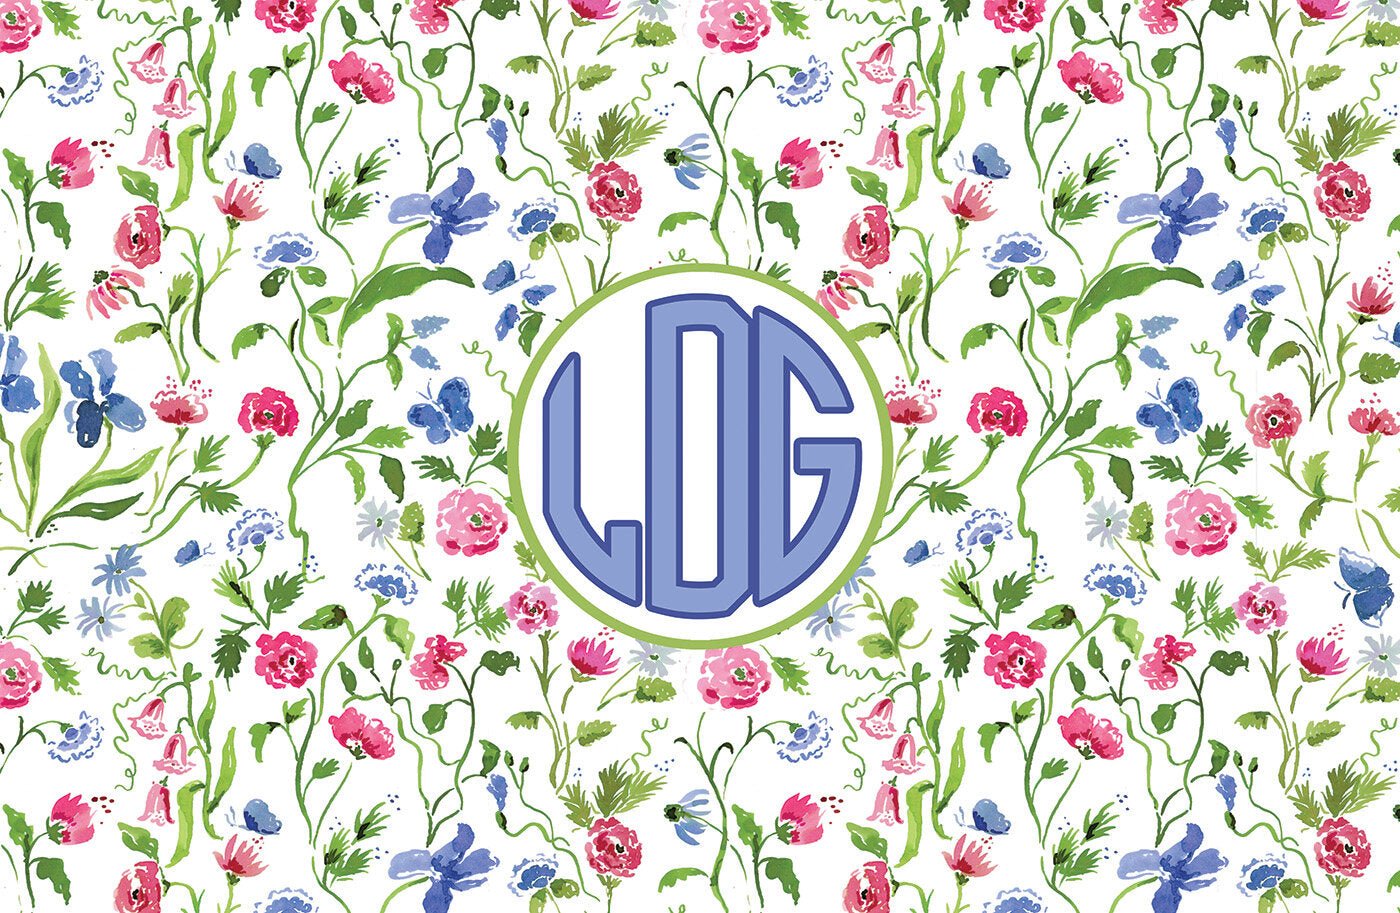 Paper placemat featuring a floral pattern on a cream background with a periwinkle circle monogram